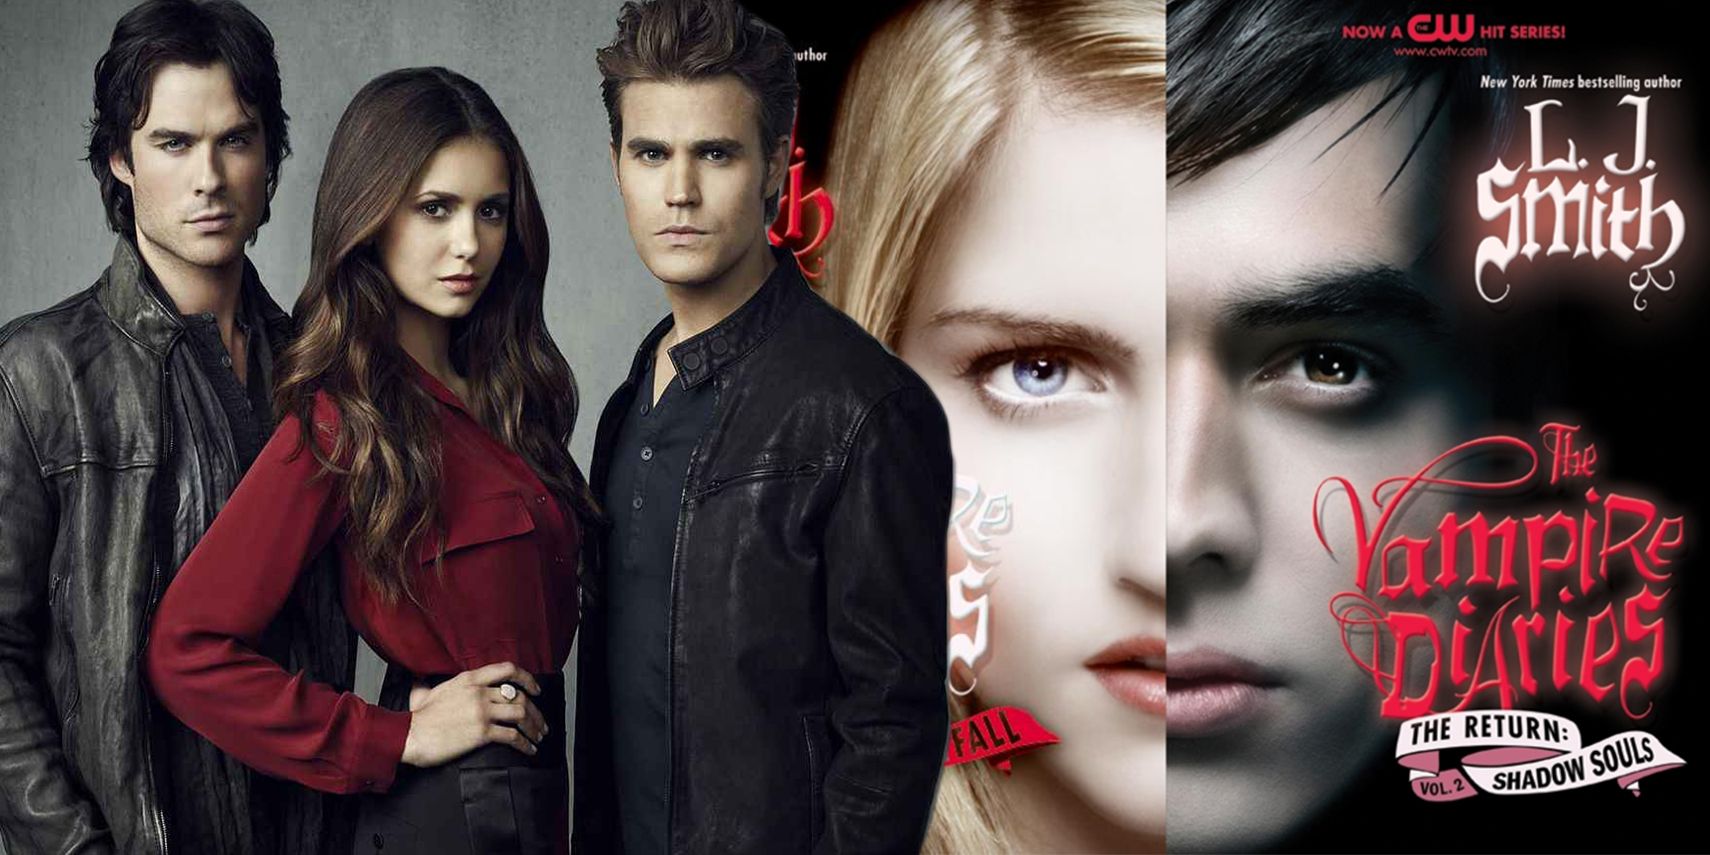 A collage of The Vampire Diaries characters from the show and the books